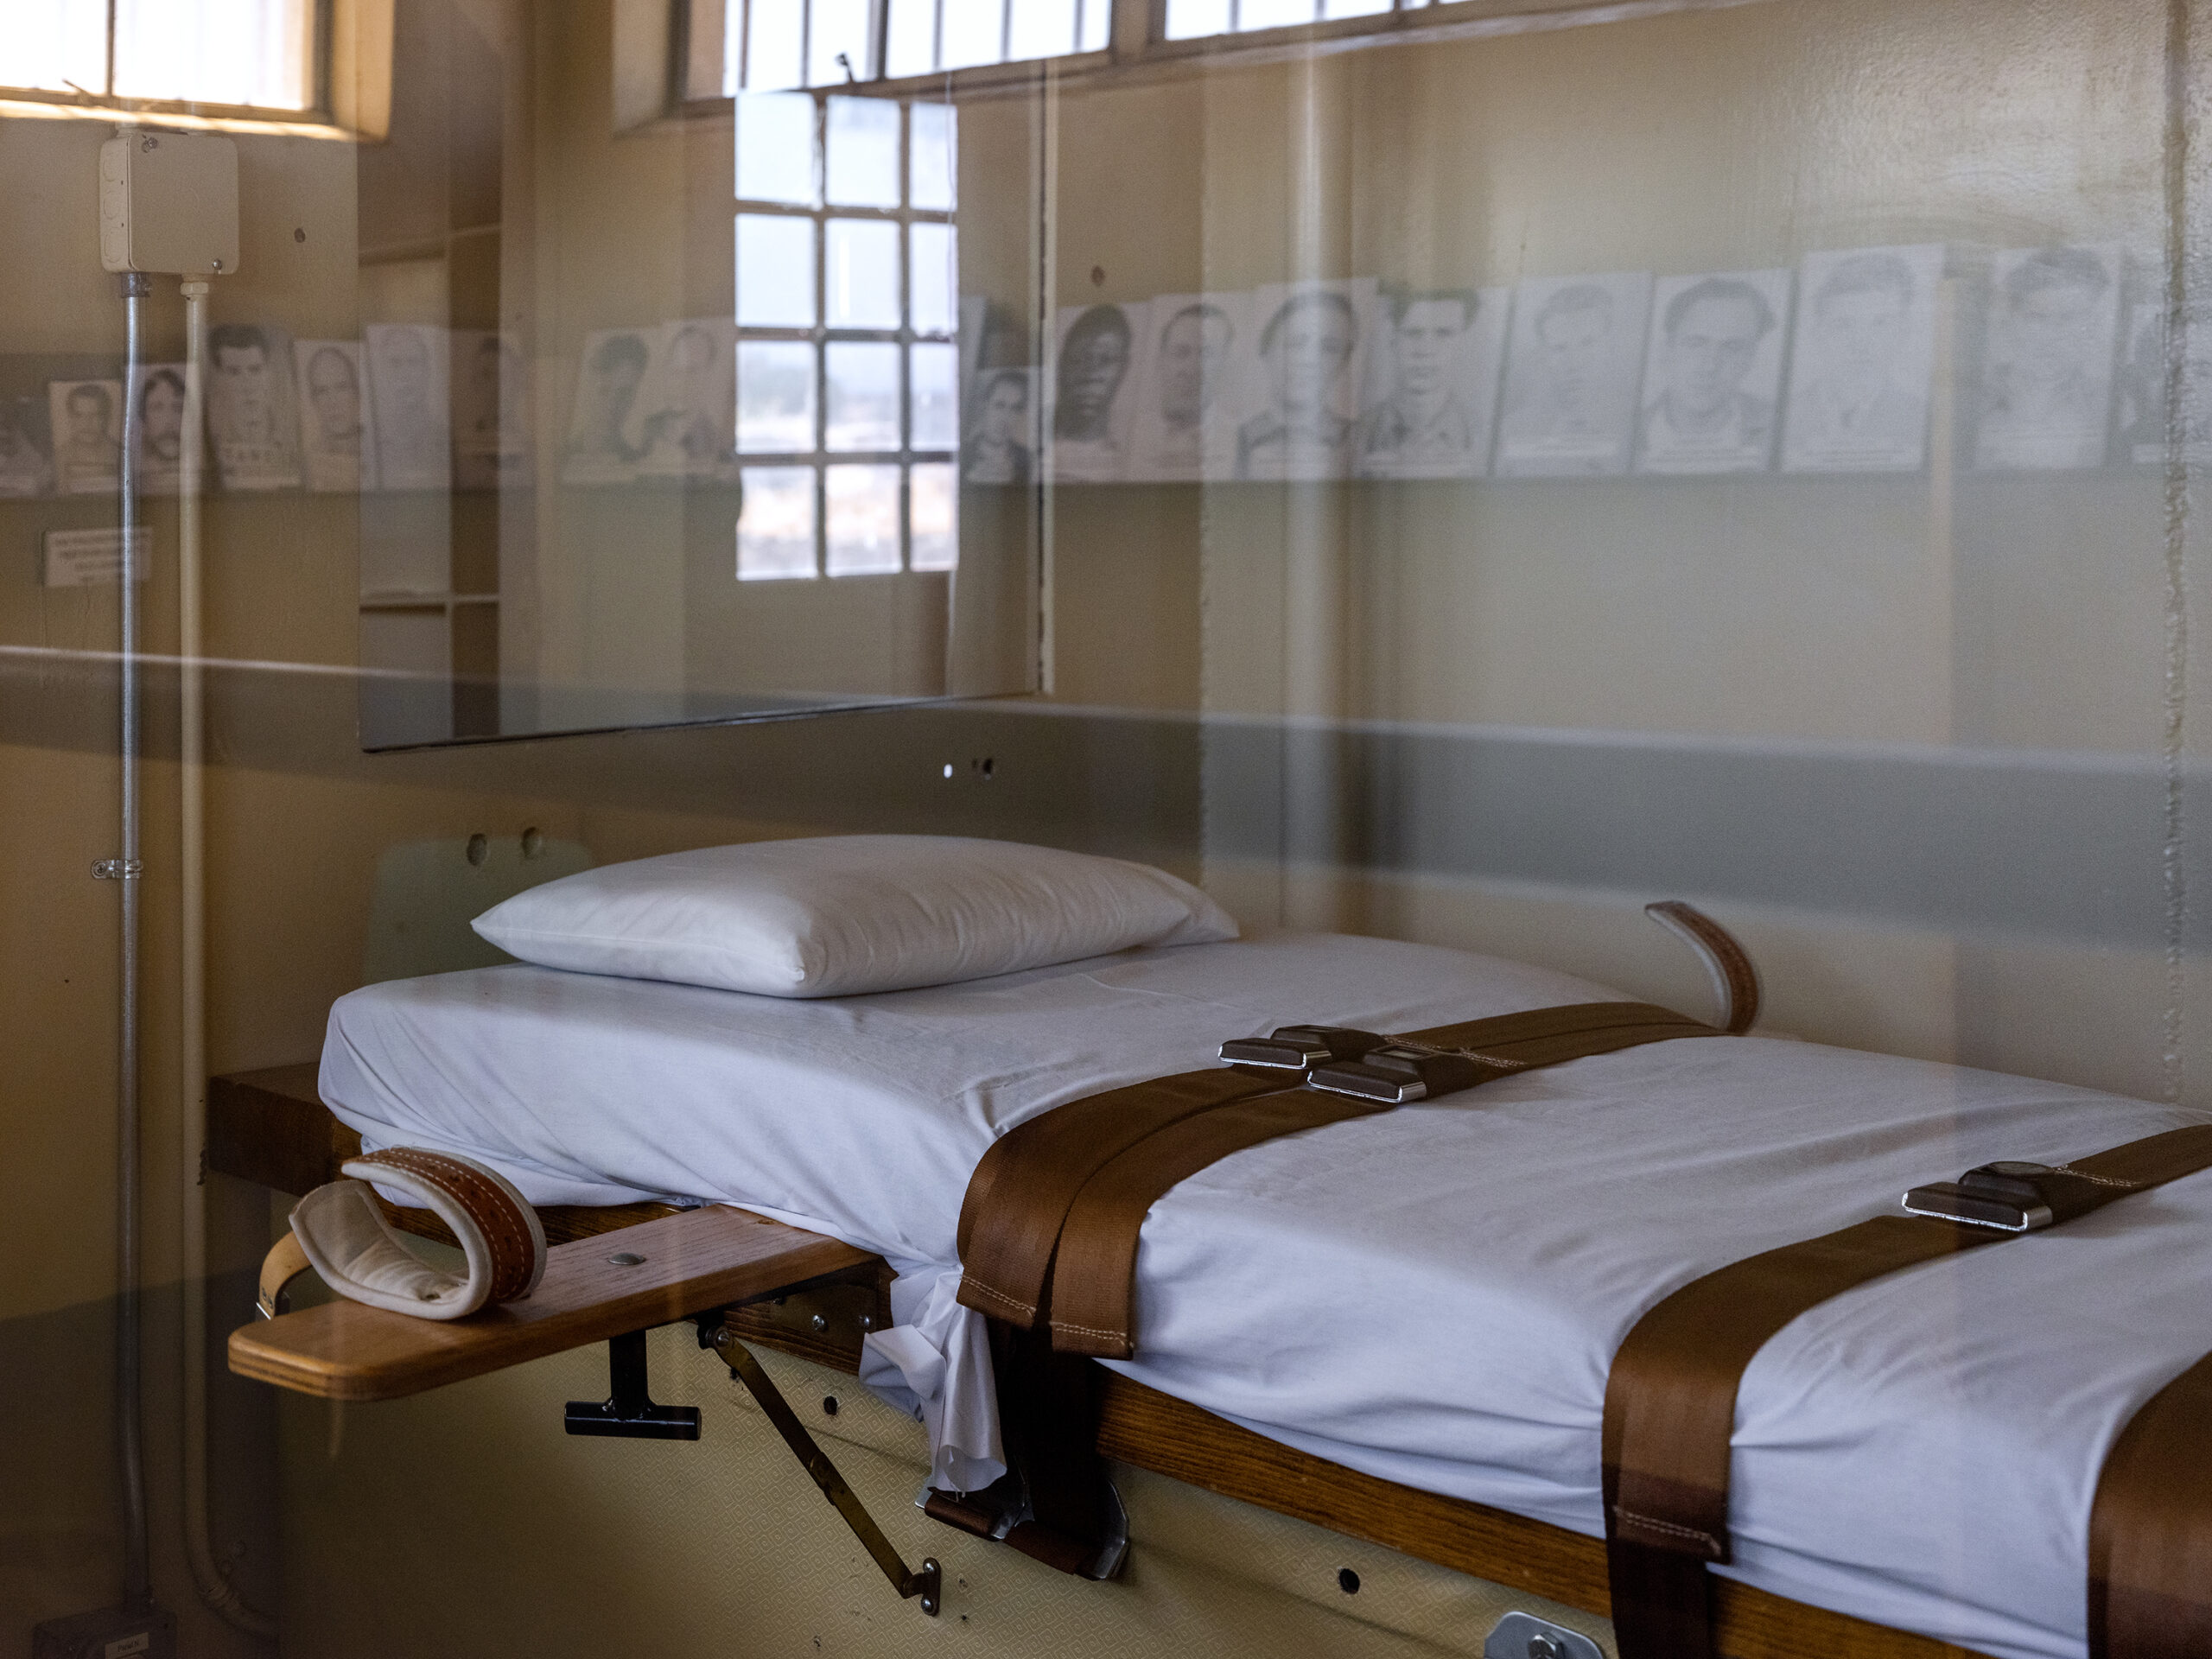 States botched more executions of Black prisoners. Experts think they know why